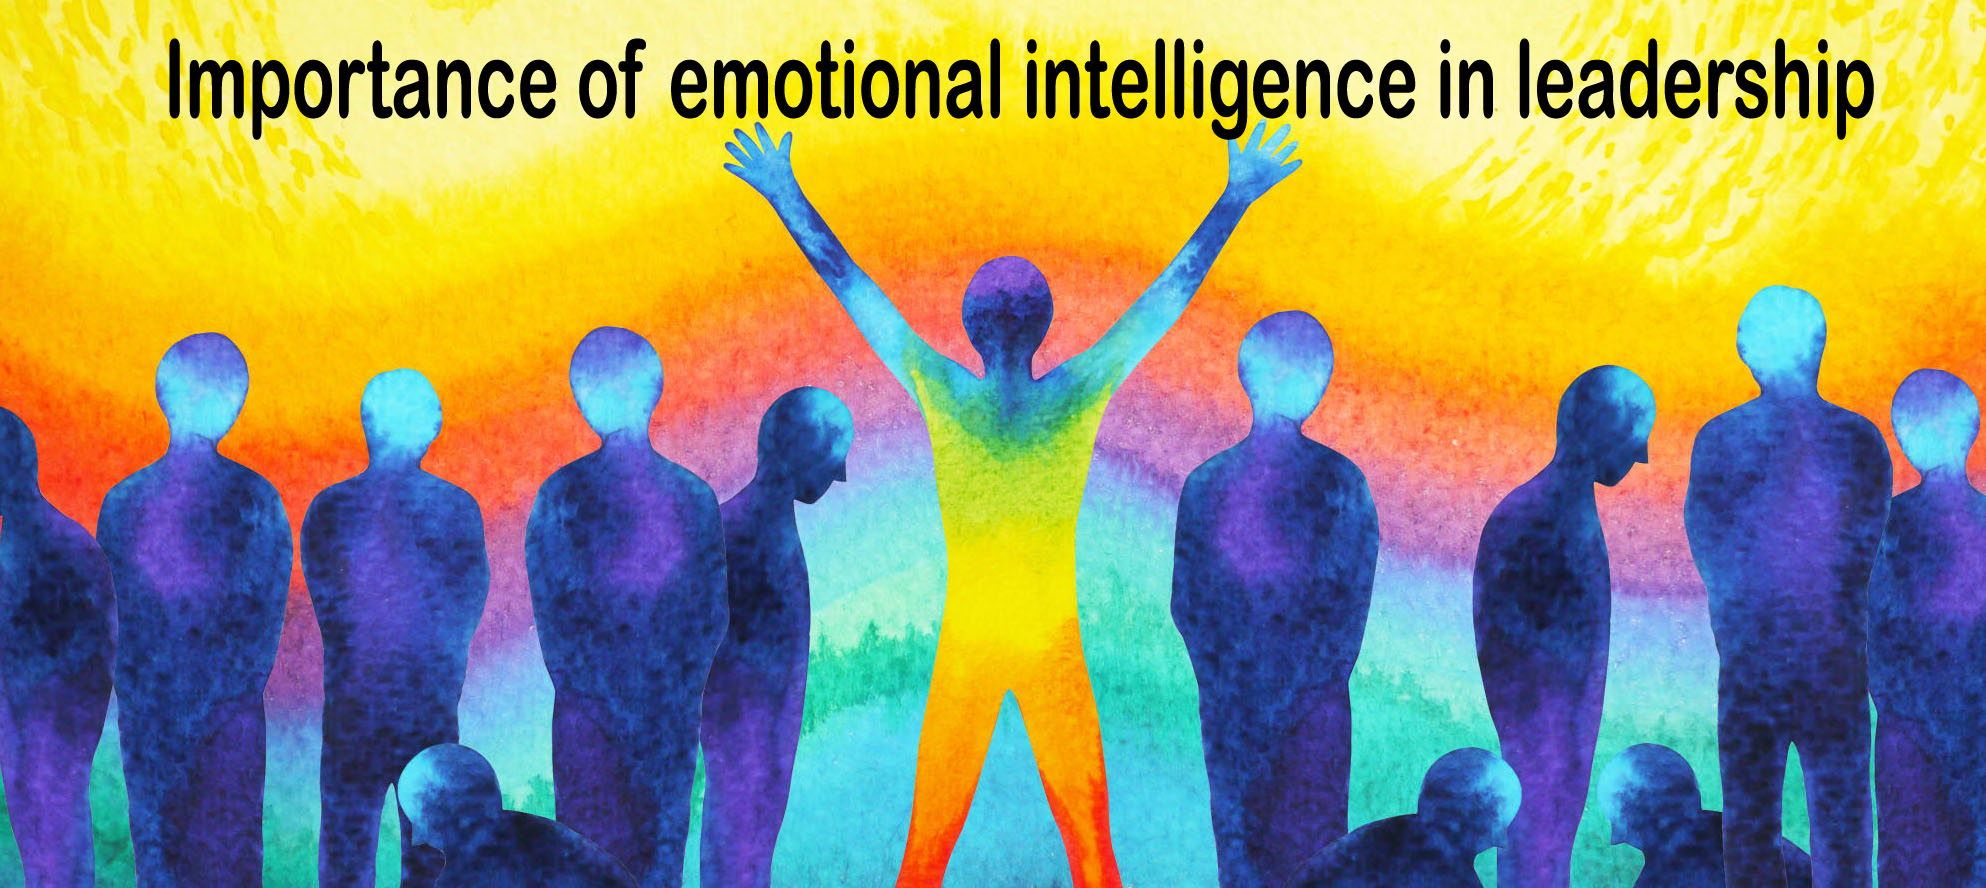 research about emotional intelligence and leadership concludes that